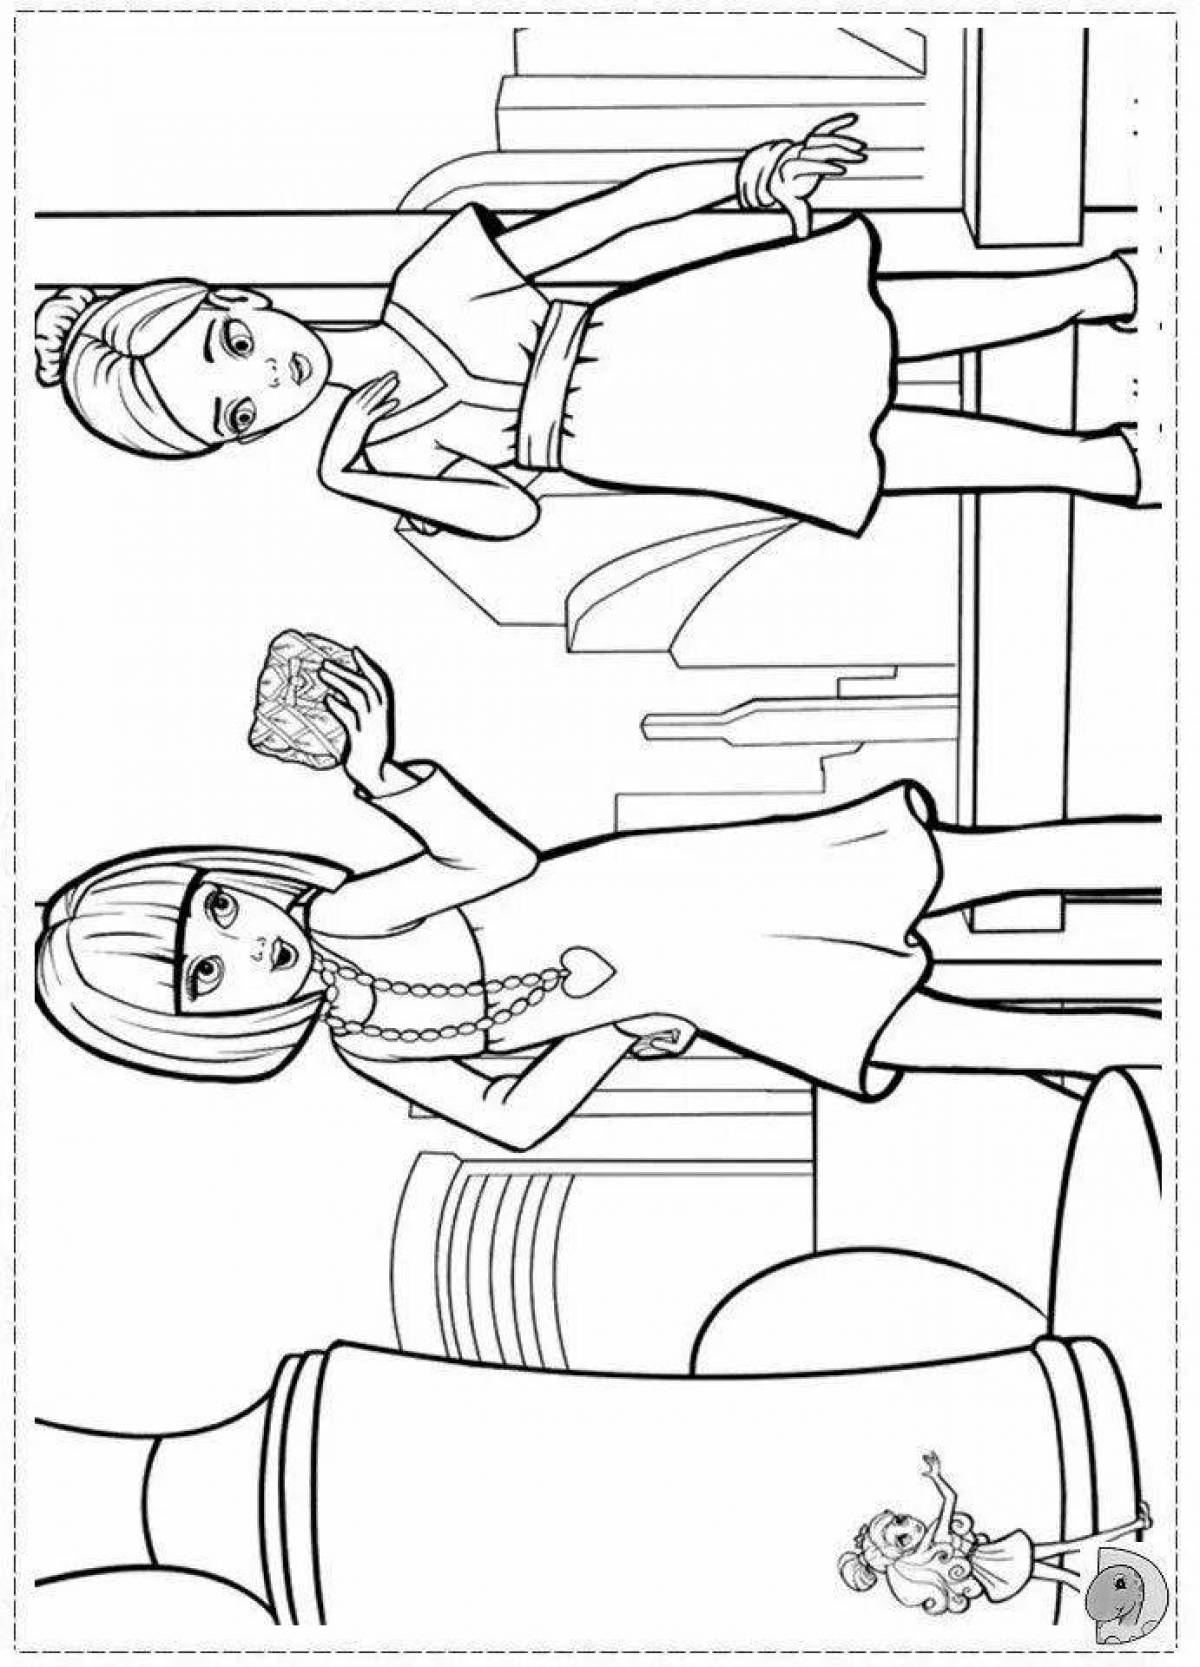 Exquisite projector barbie coloring book